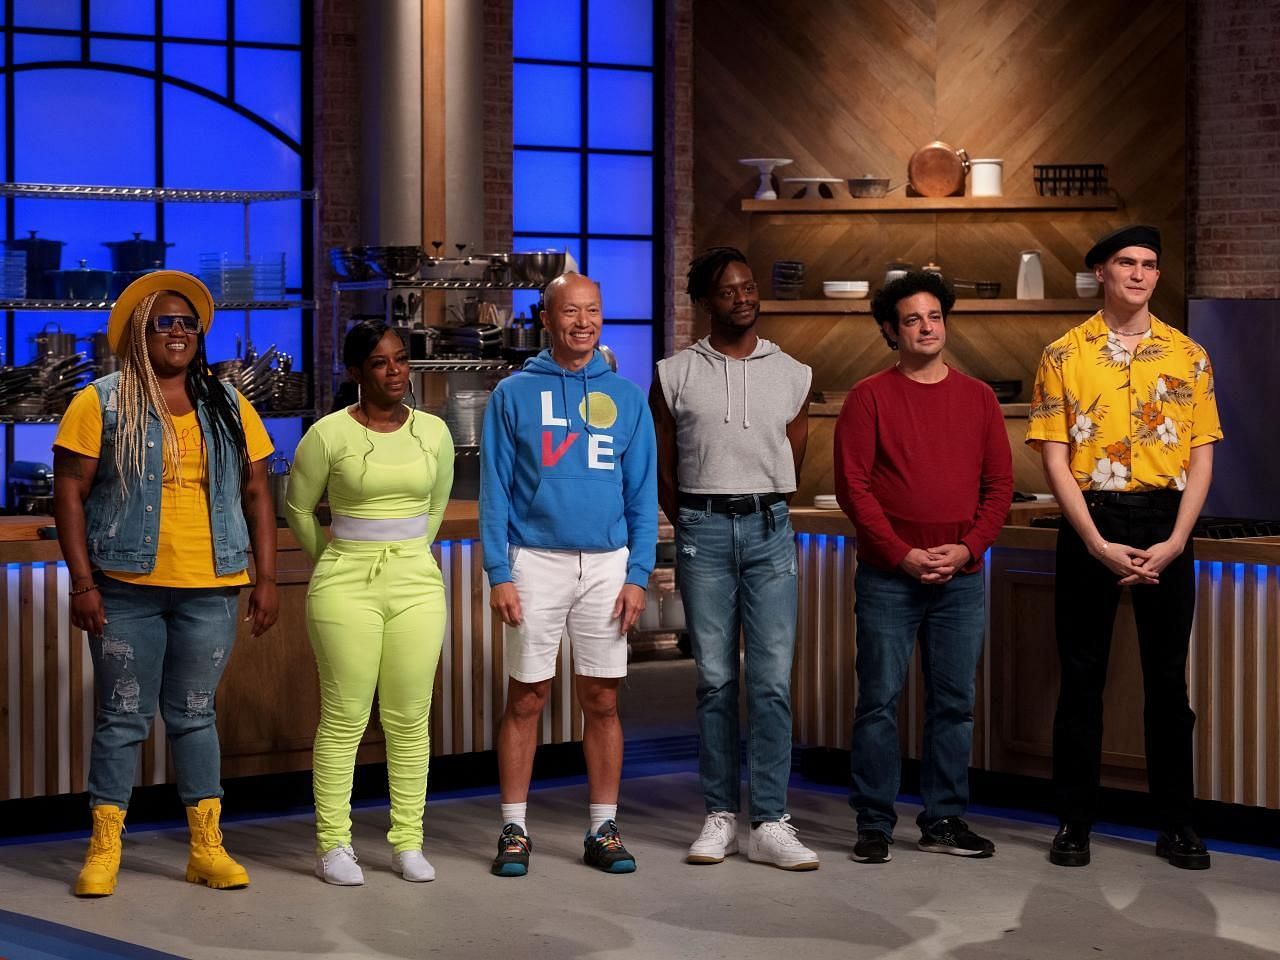 There will be 12 contestants on the new season of Worst Cooks In America: Viral Sensations. (Image via Food Network)